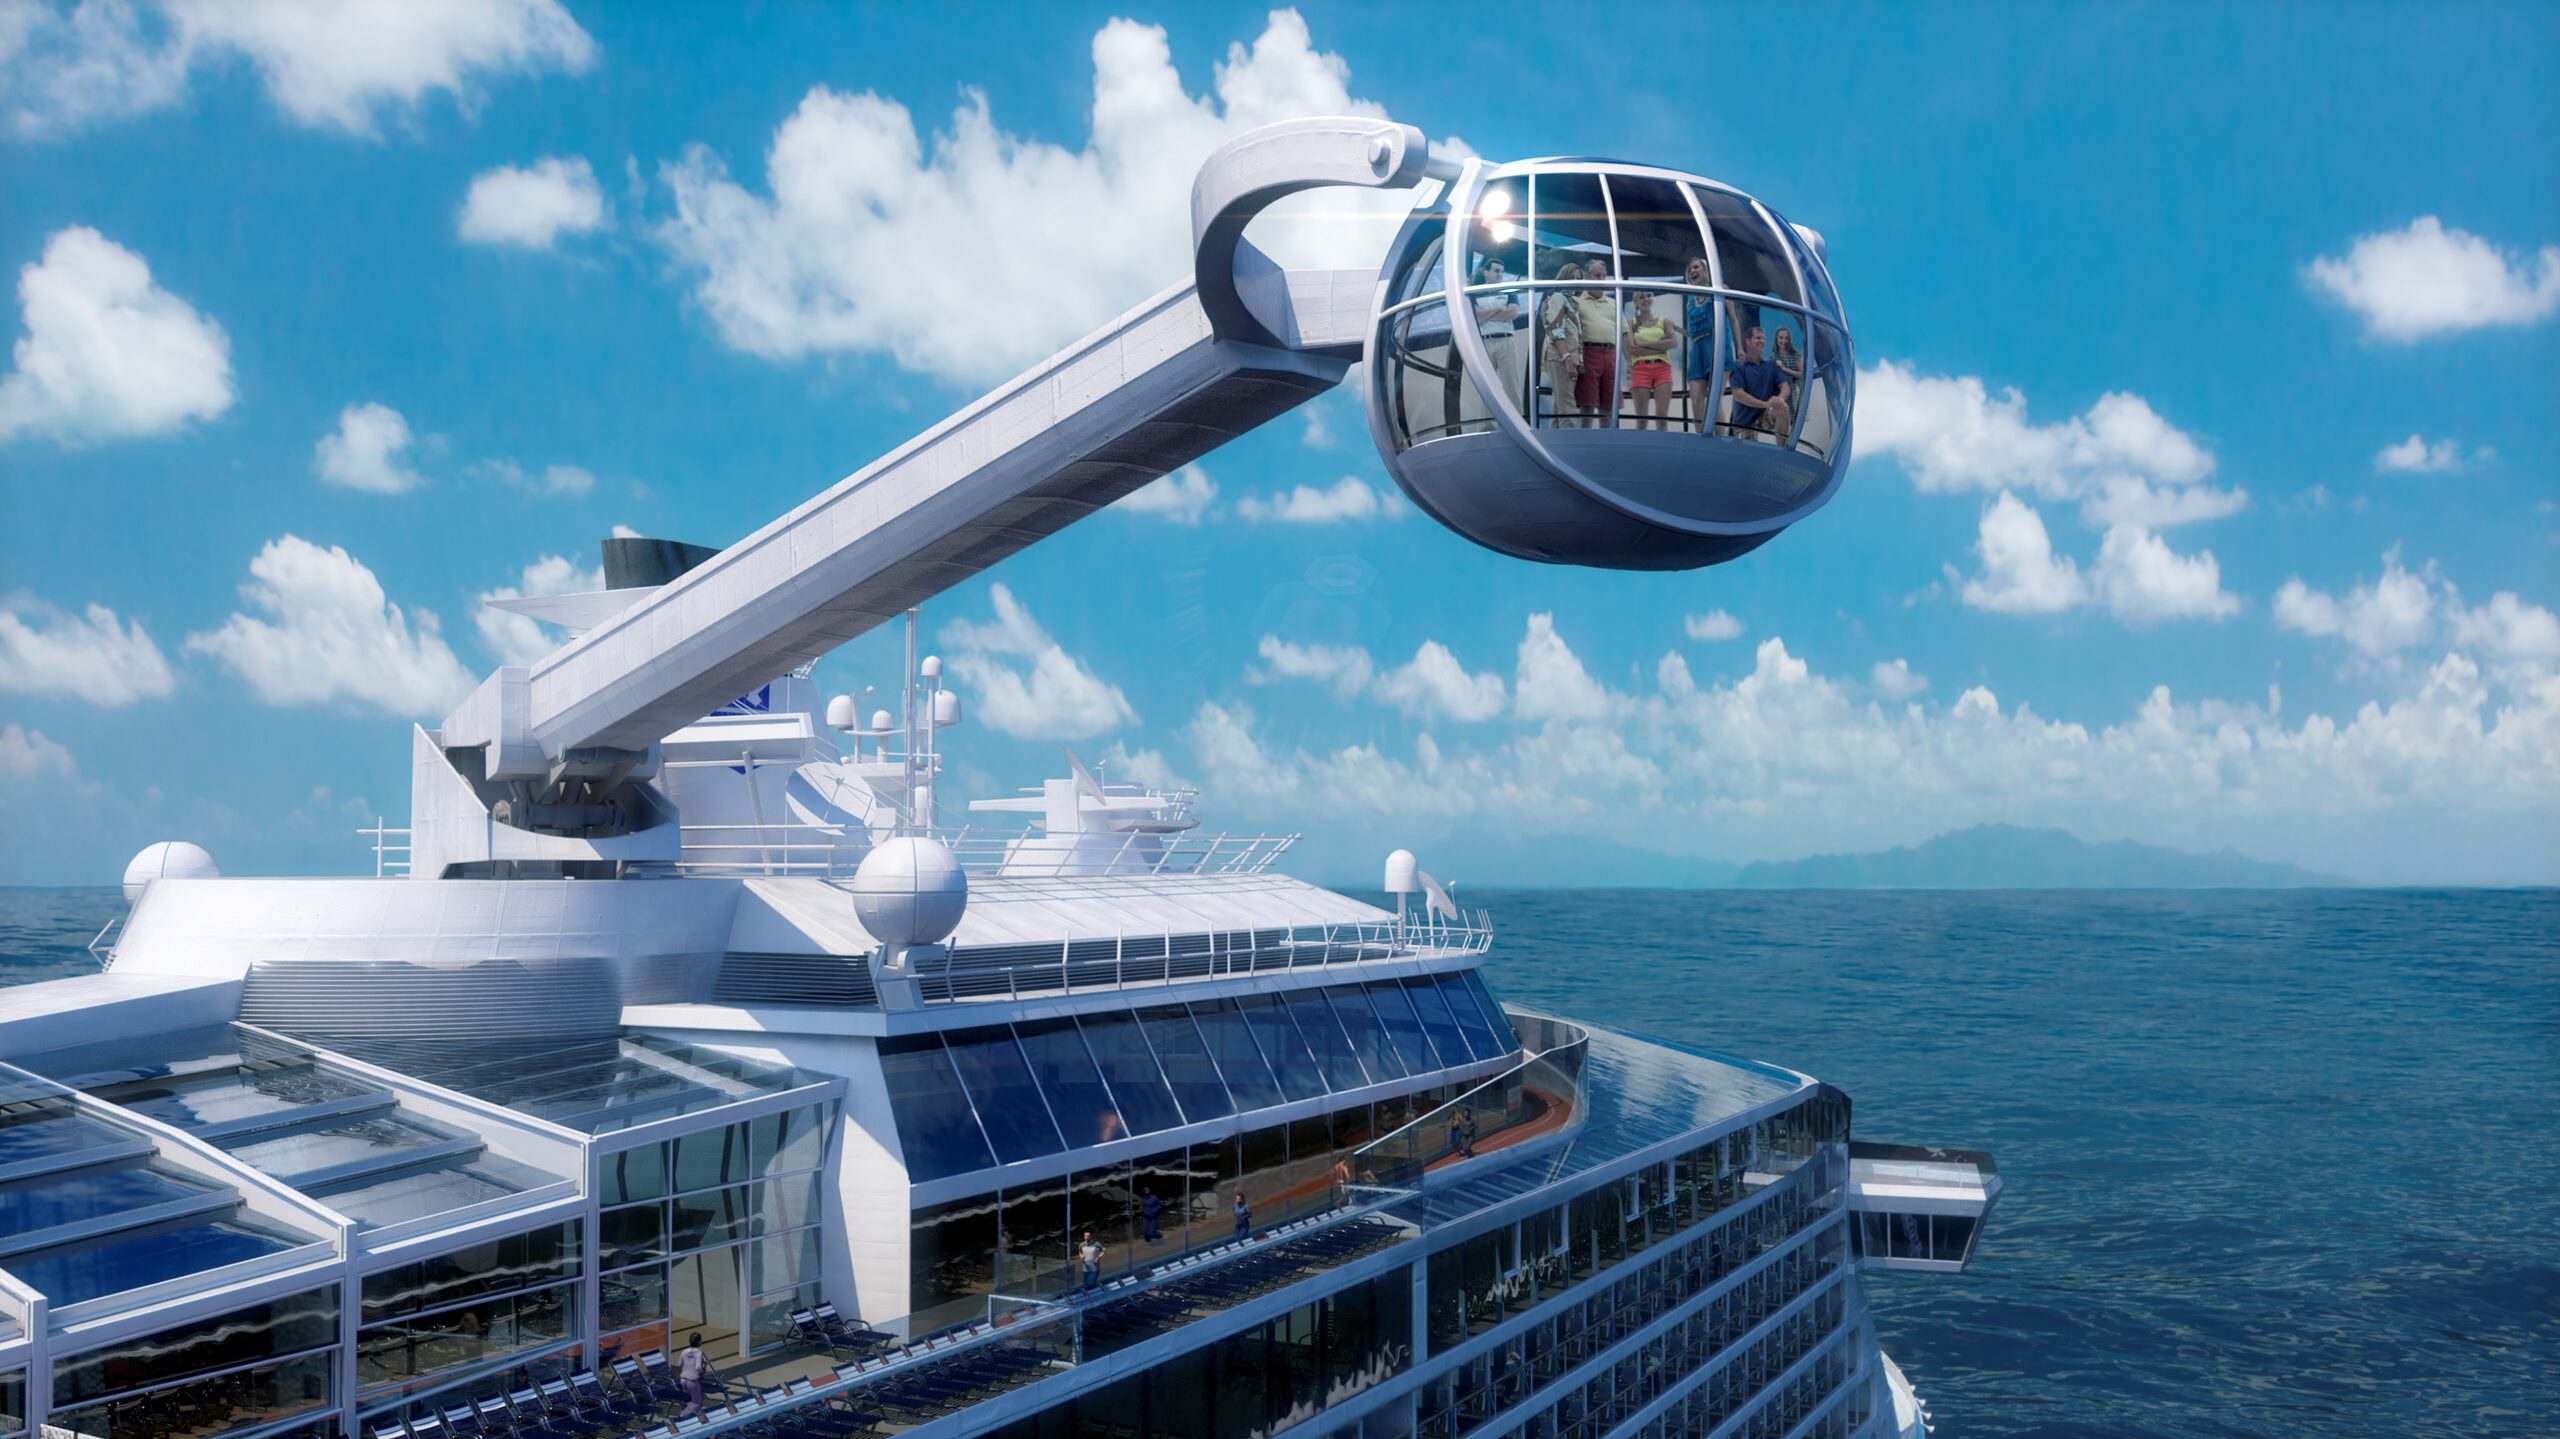 Is This The Cruise Ship Of The Future?